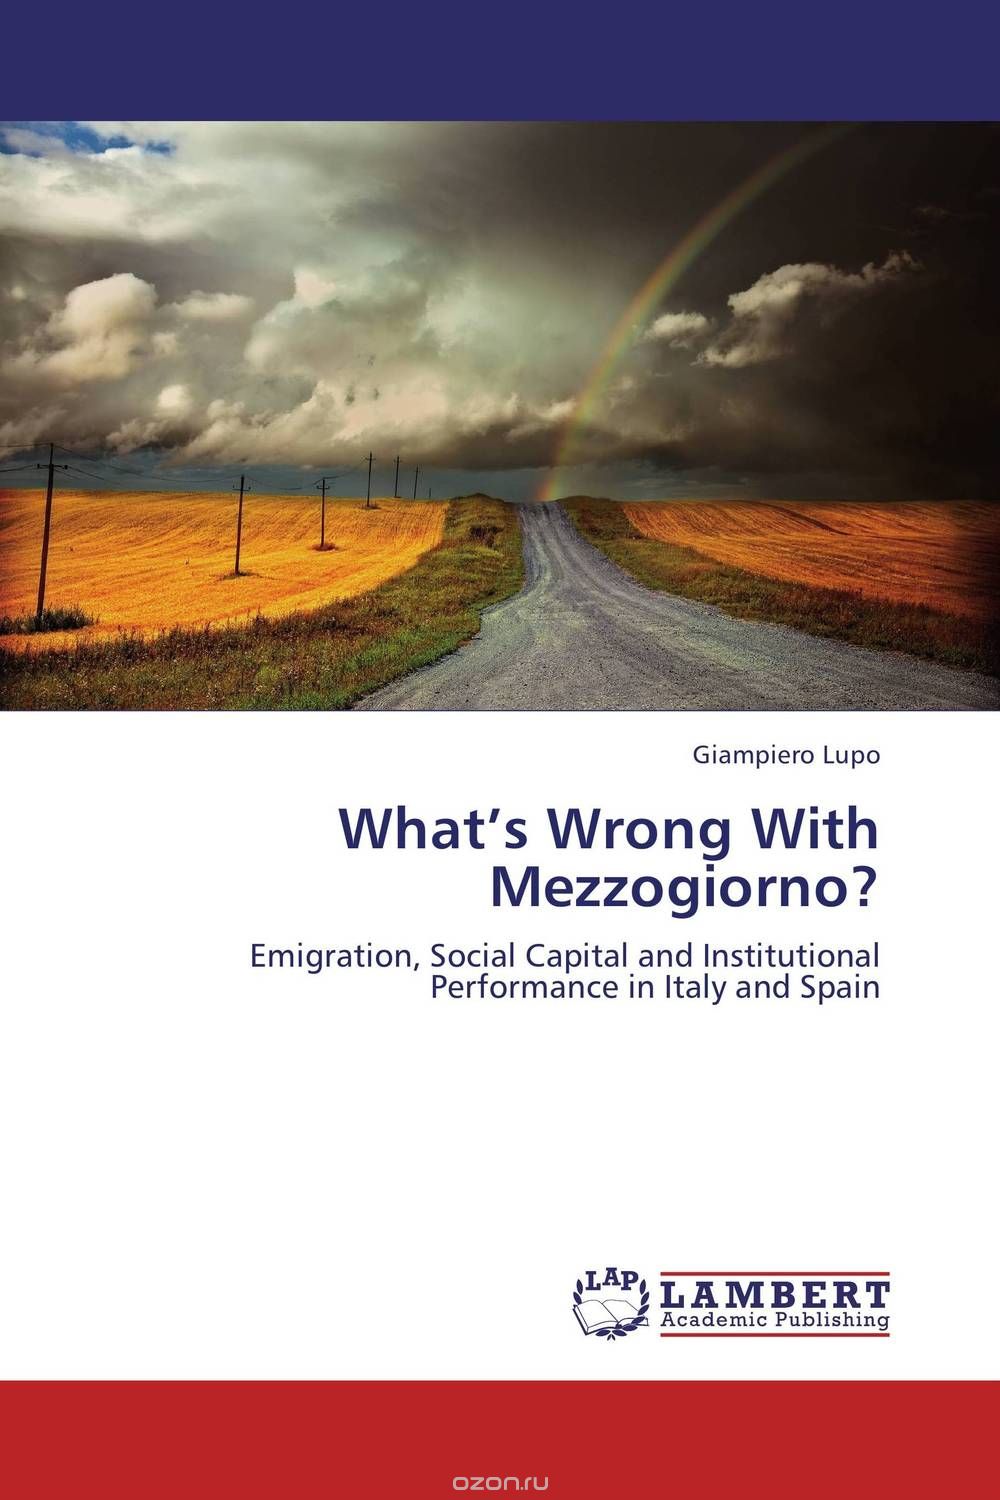 What’s Wrong With Mezzogiorno?